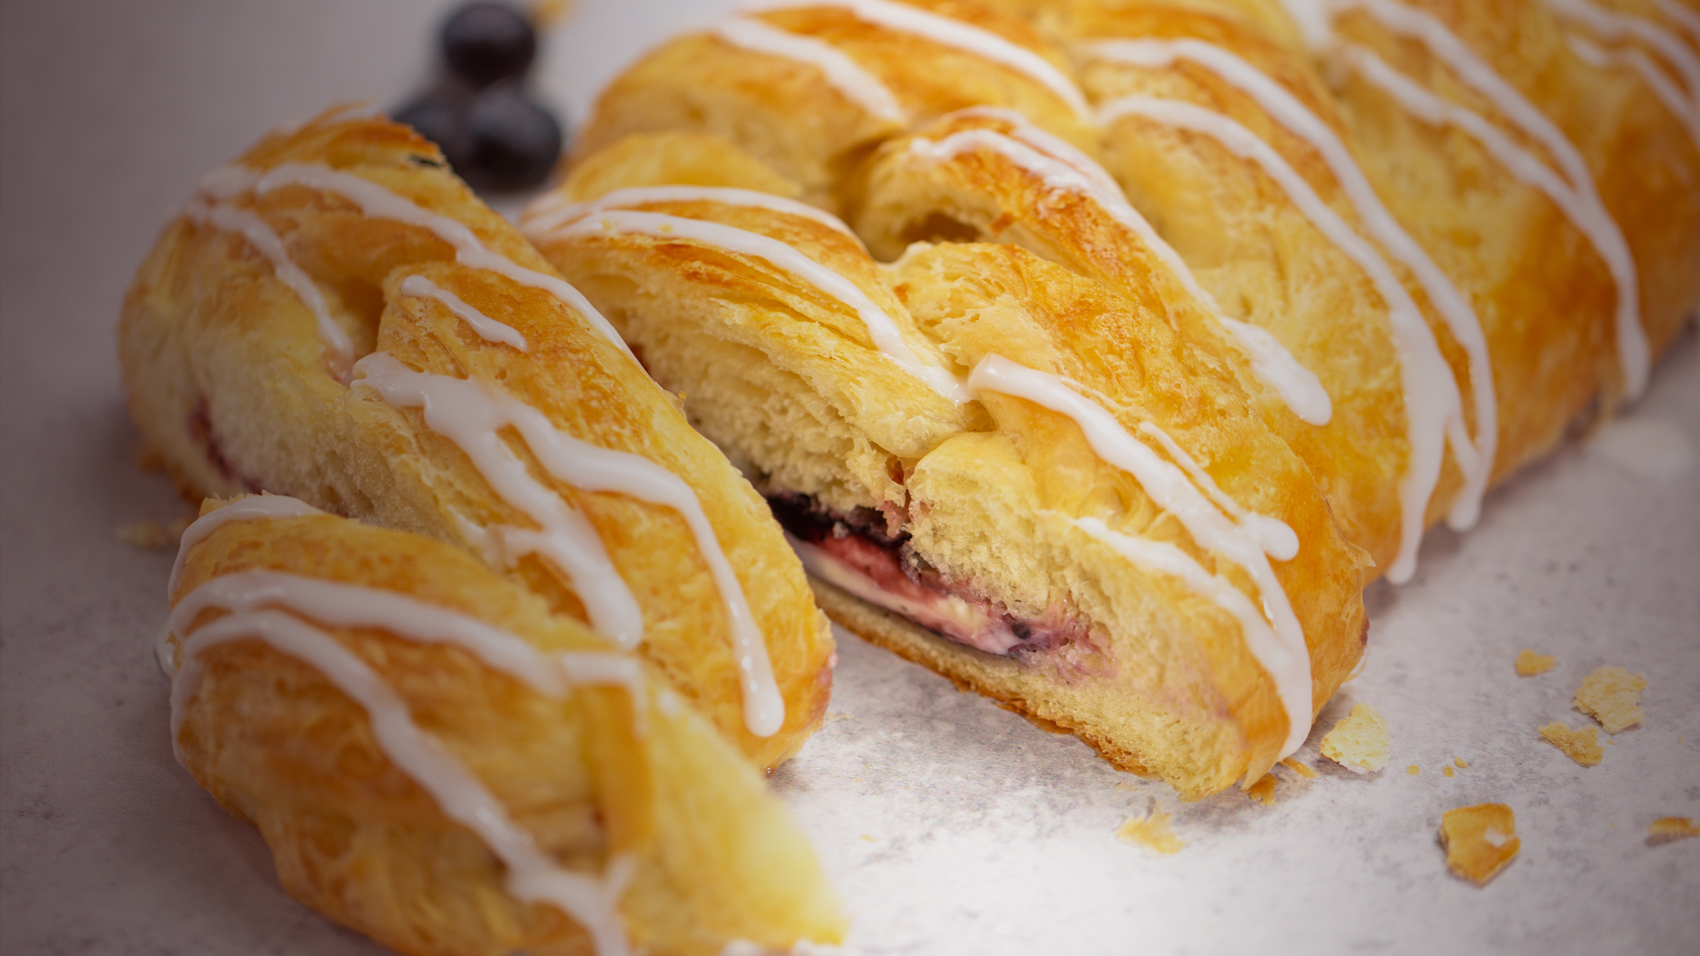 Blueberry Cream Cheese braided pastry